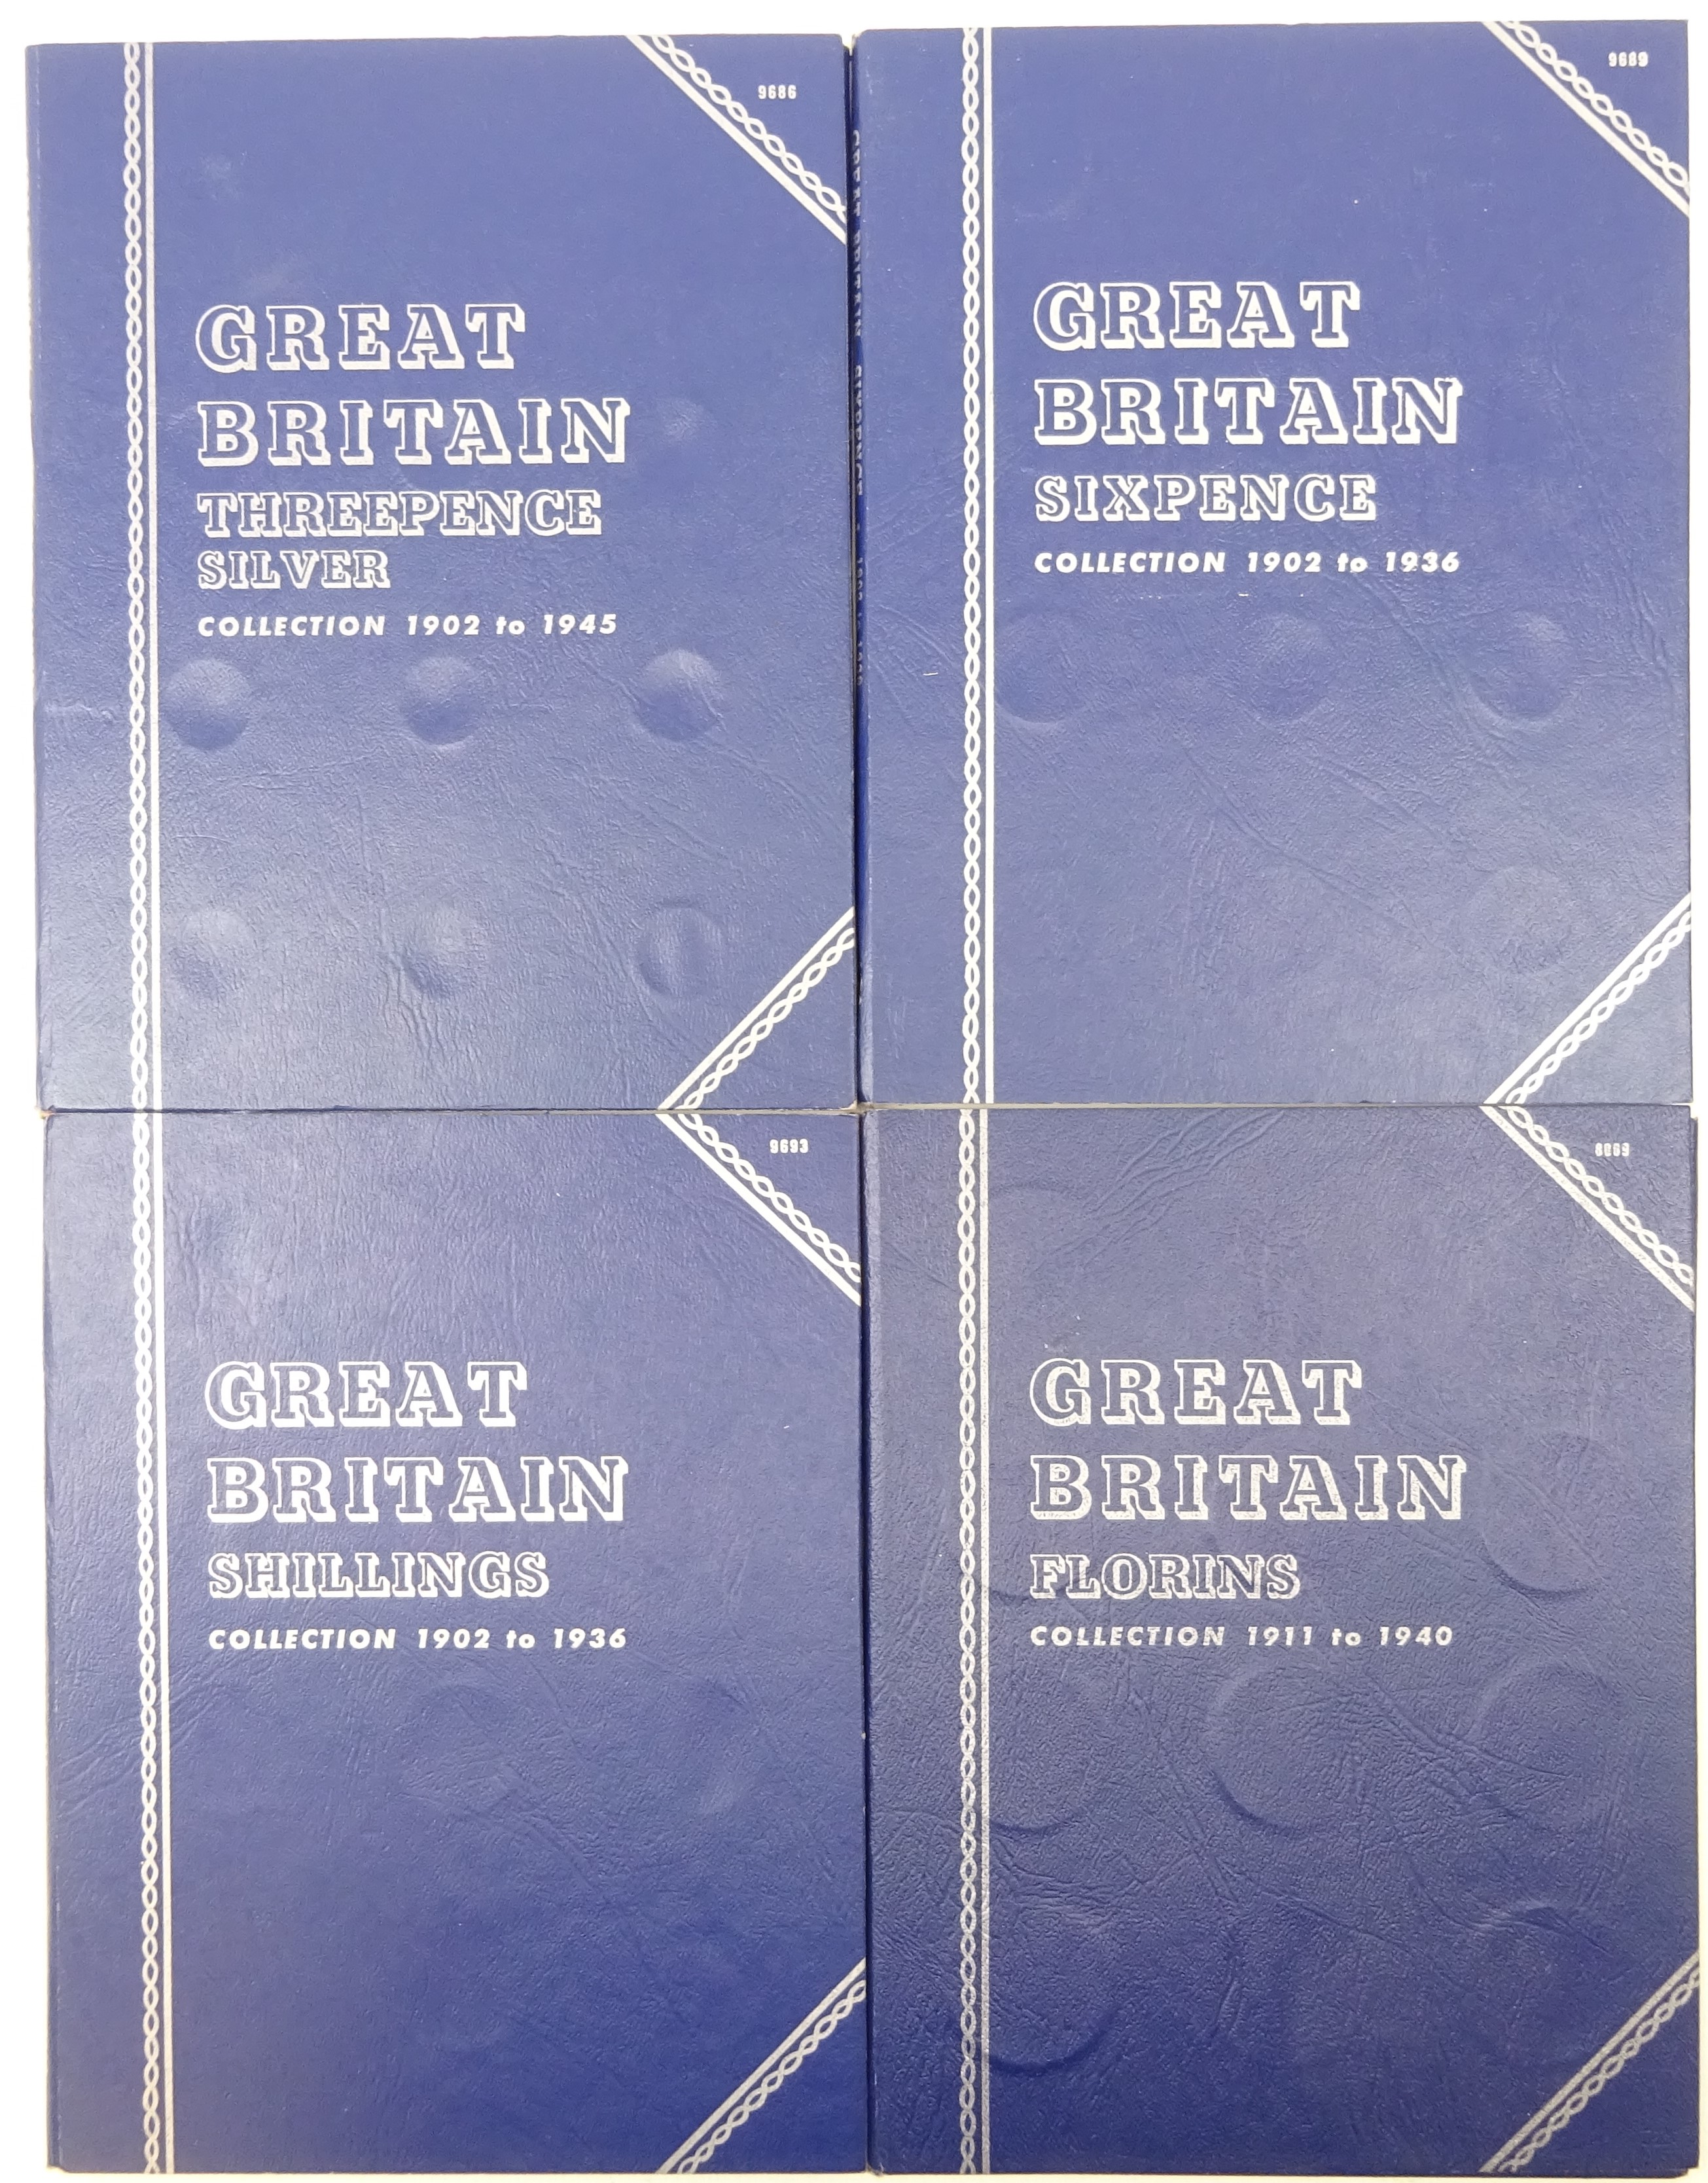 Four Whitman folders, 'Great Britain Florins collection 1911 to 1940', missing 1927,